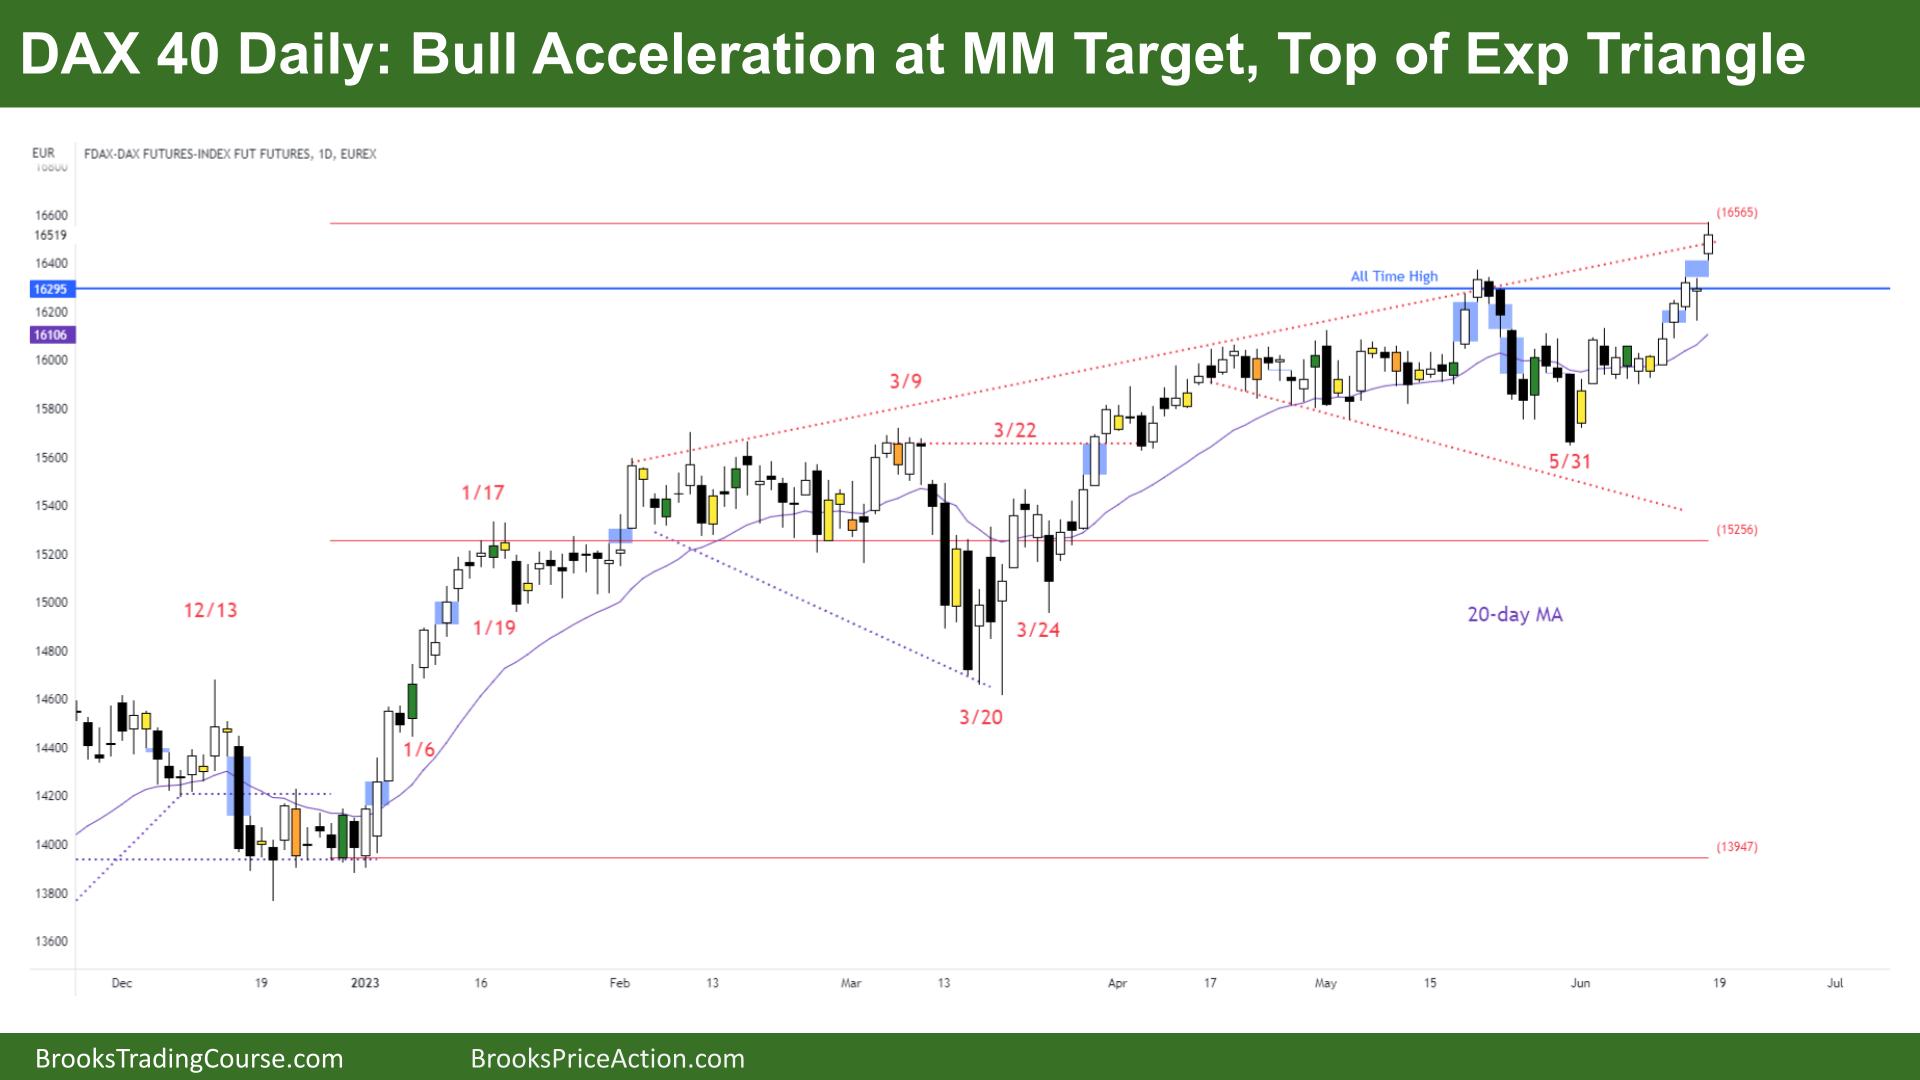 DAX 40 Daily Bull Acceleration at MM Target, Top of Exp Triangle
